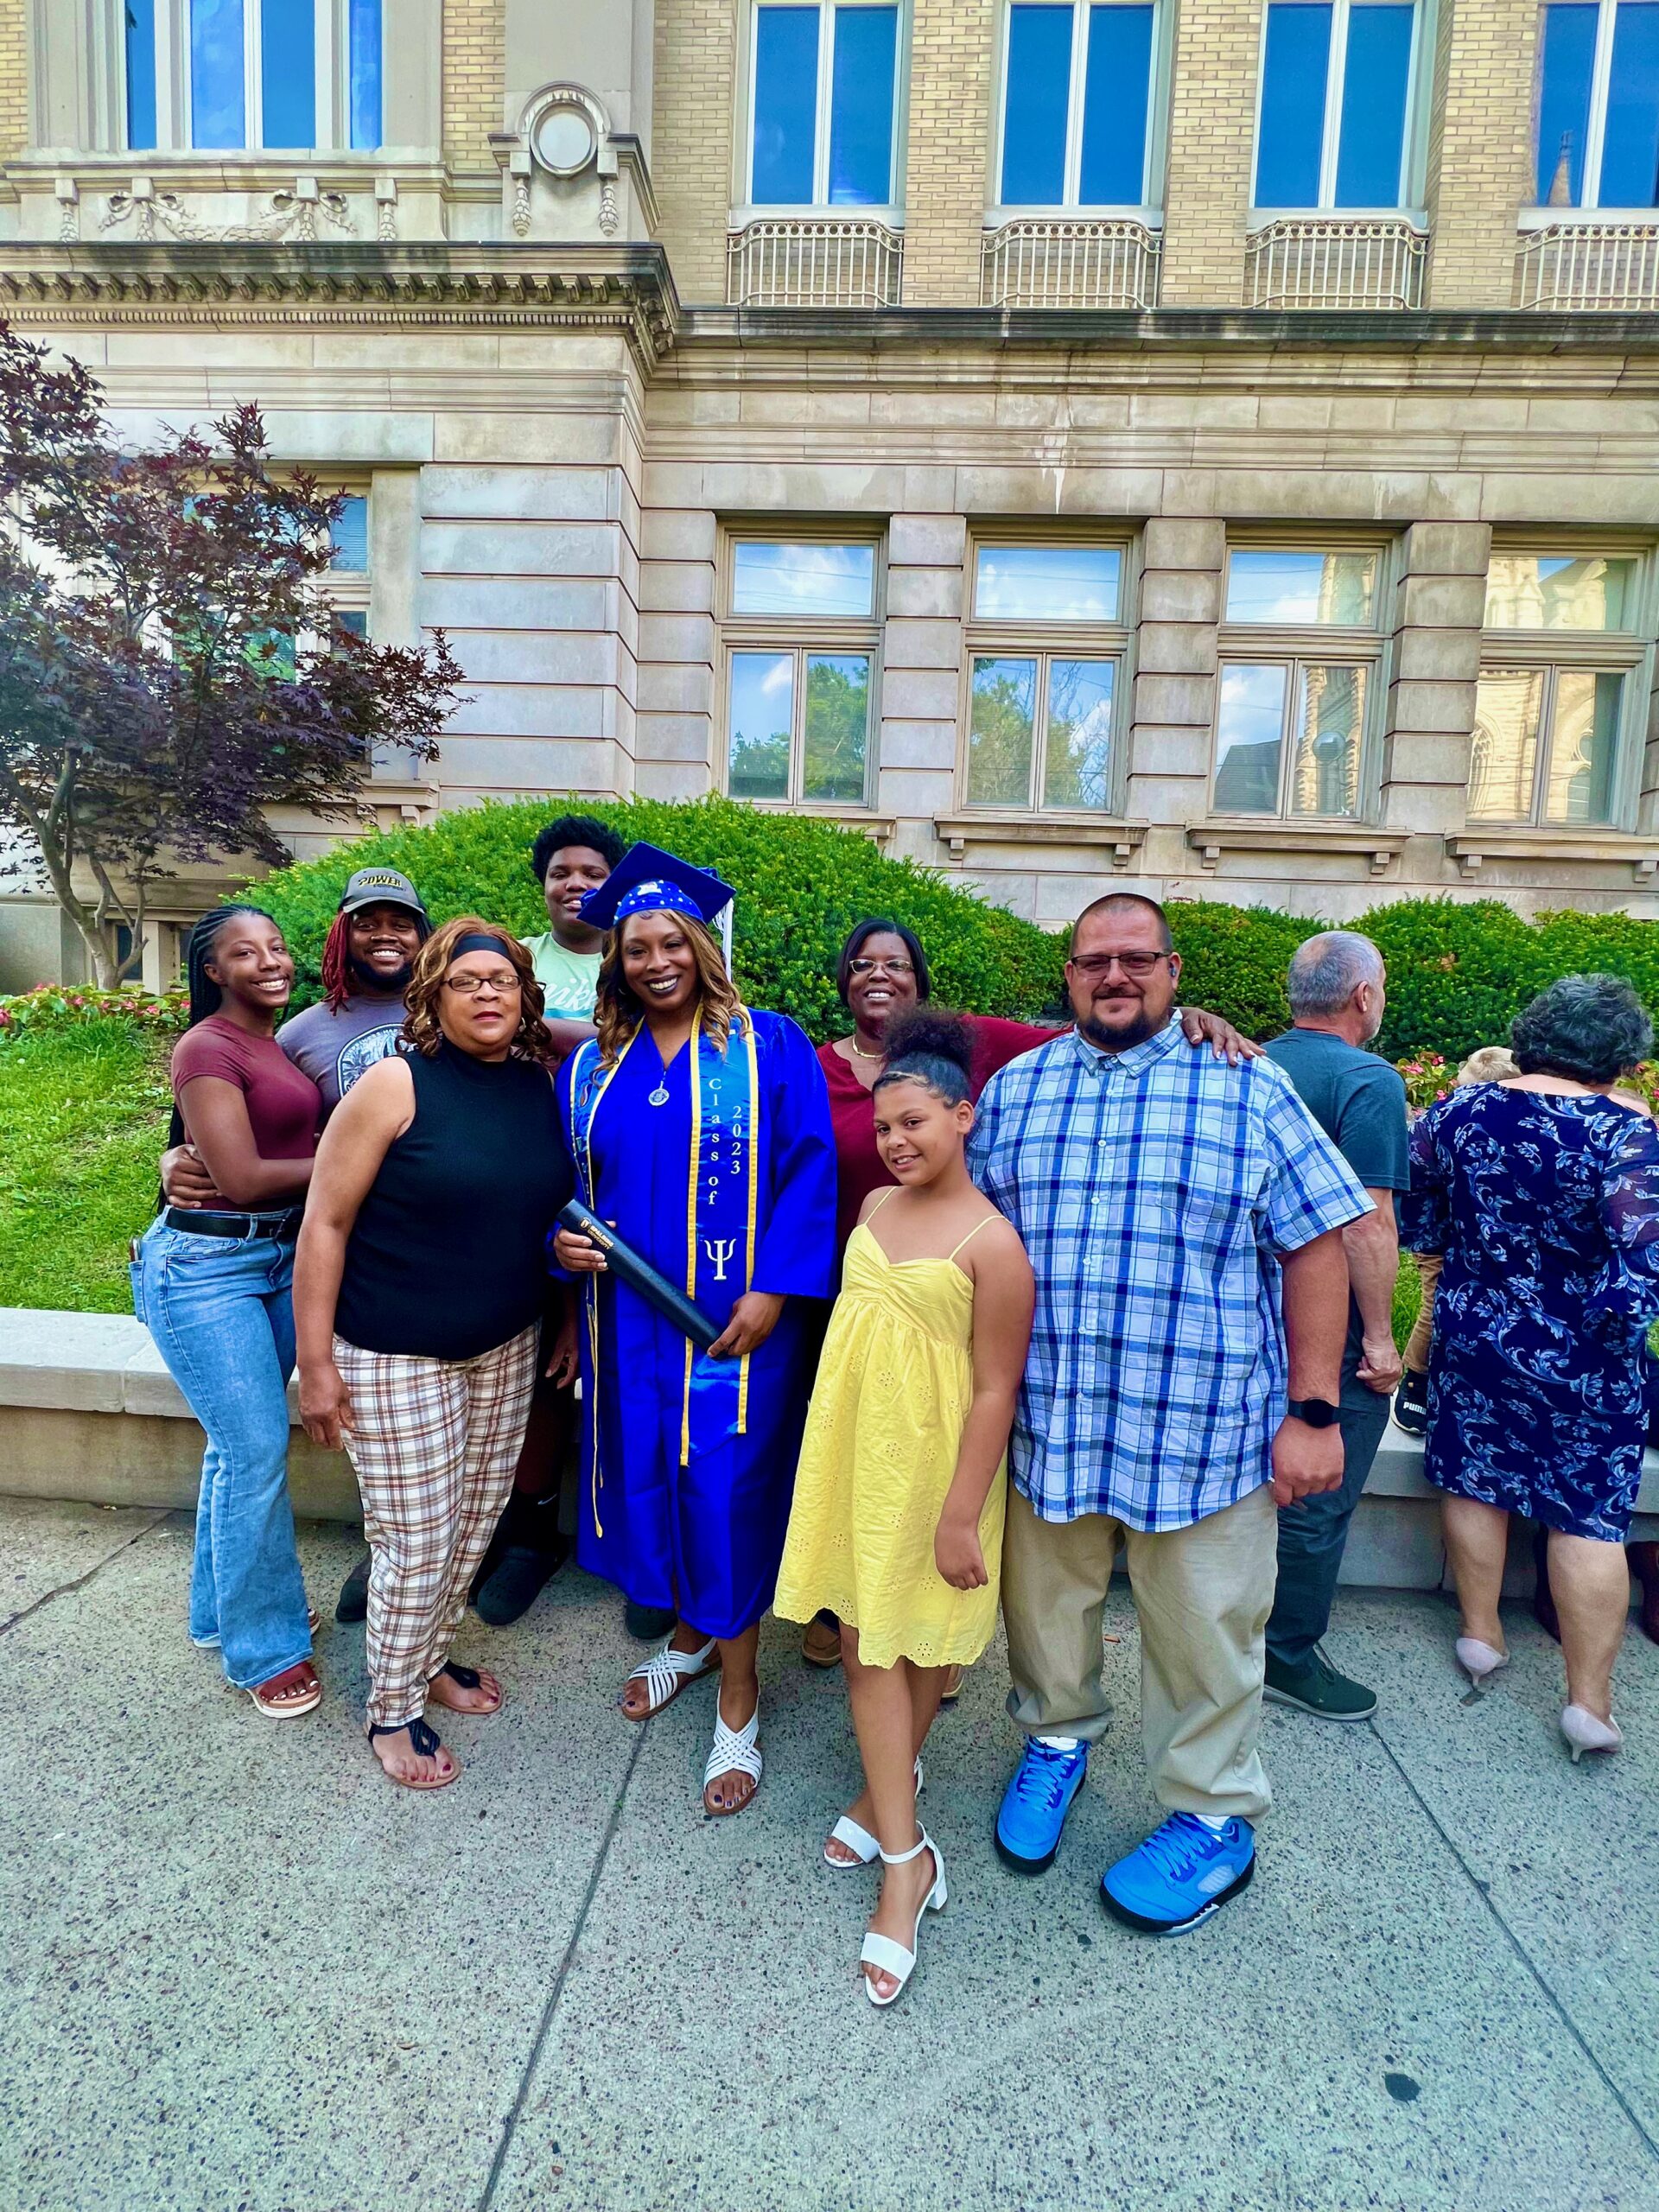 Spalding bachelor's graduate posing with family for photo outside